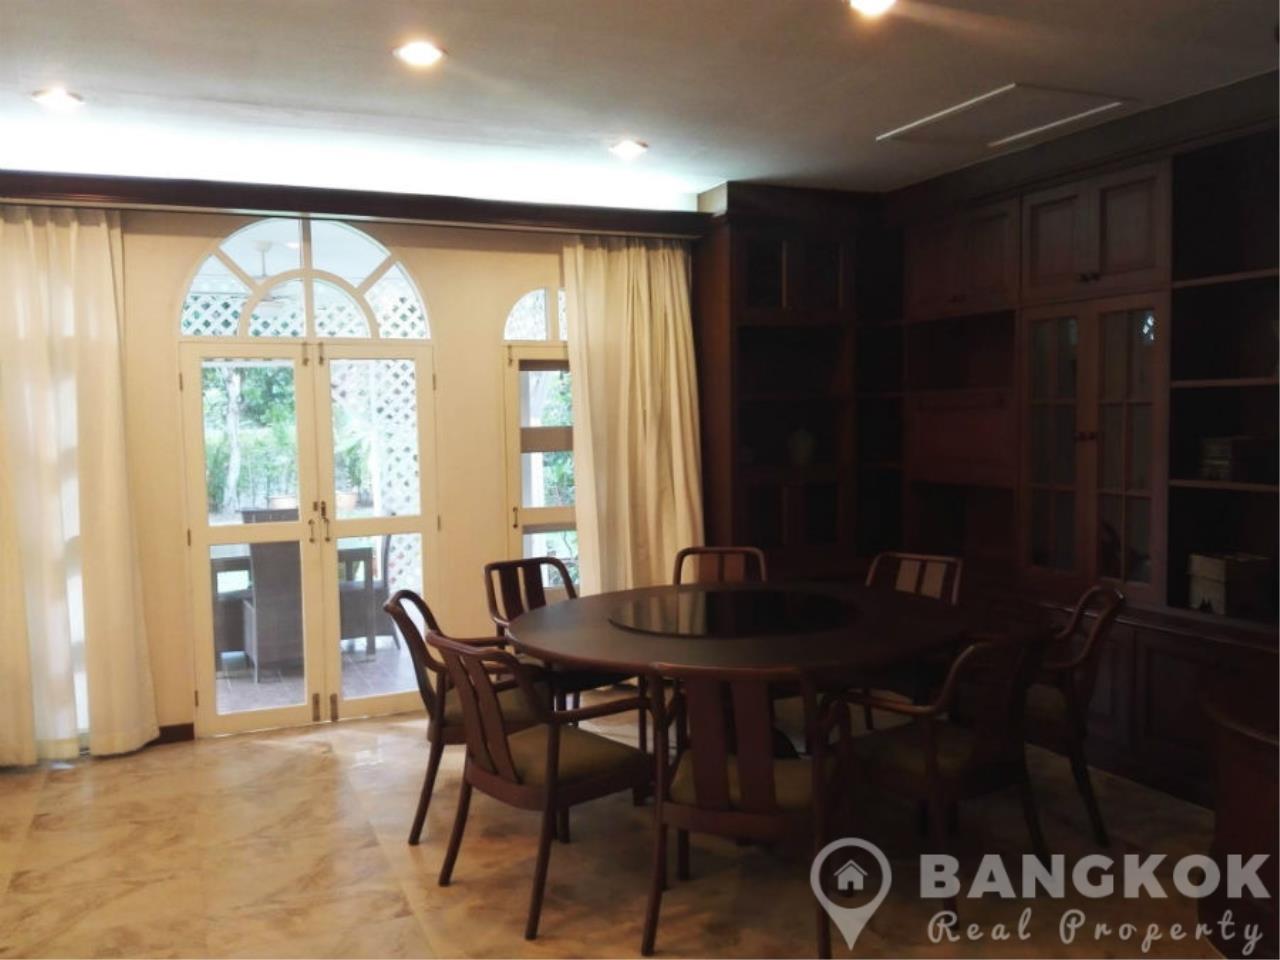 Spacious Detached Family Home 3+1 Beds 4 Bath at Panya Village Compound, ภาพที่ 4